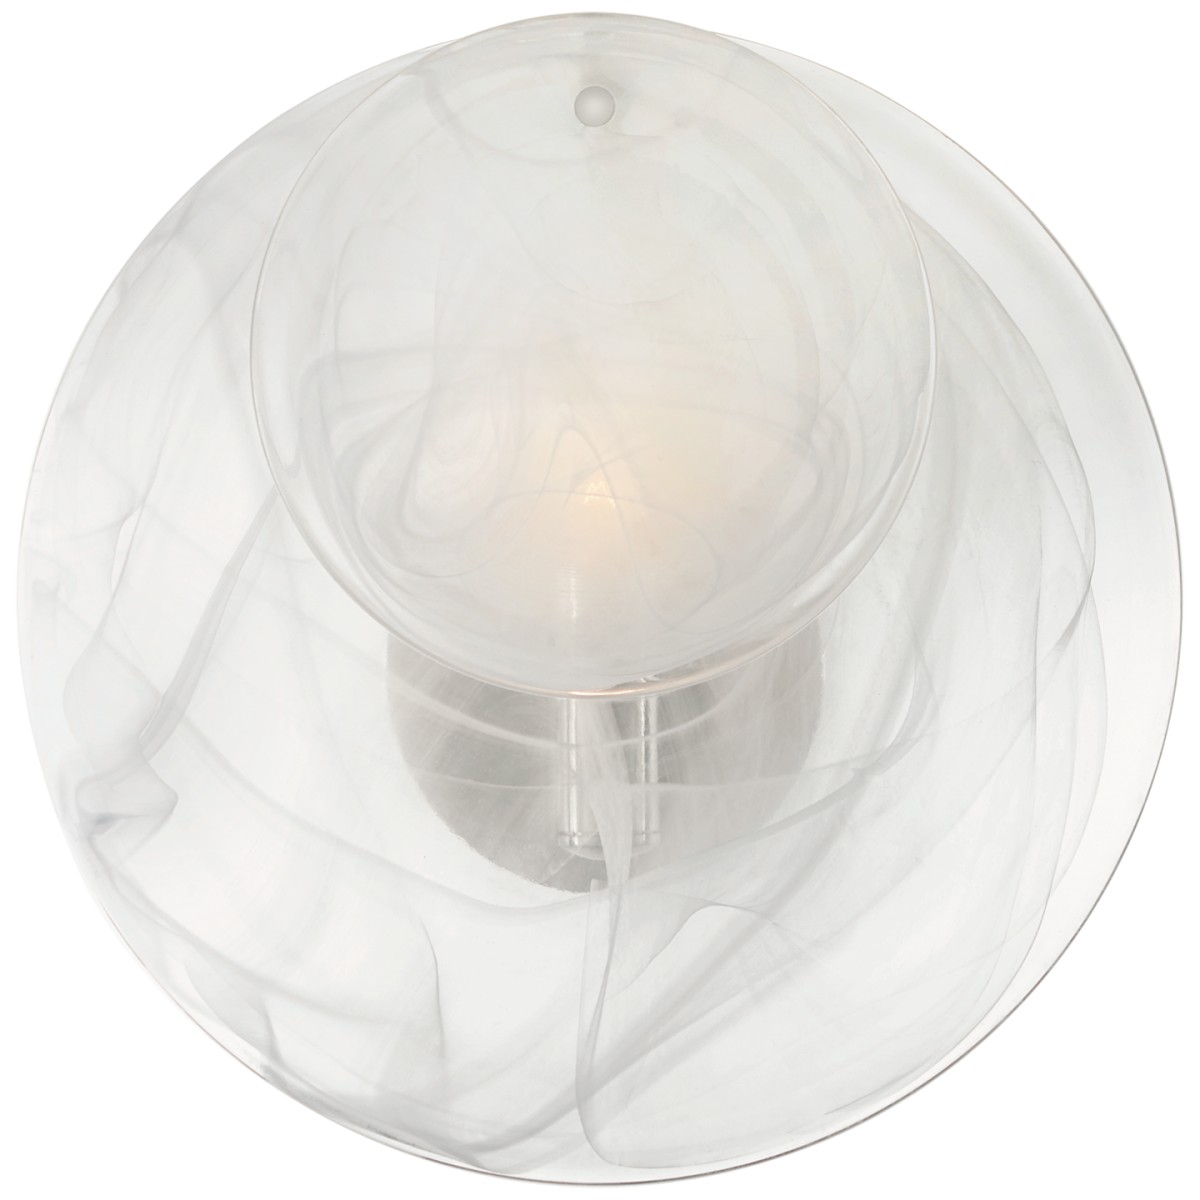 Loire Small Sconce with White Strie Glass | Highlight image